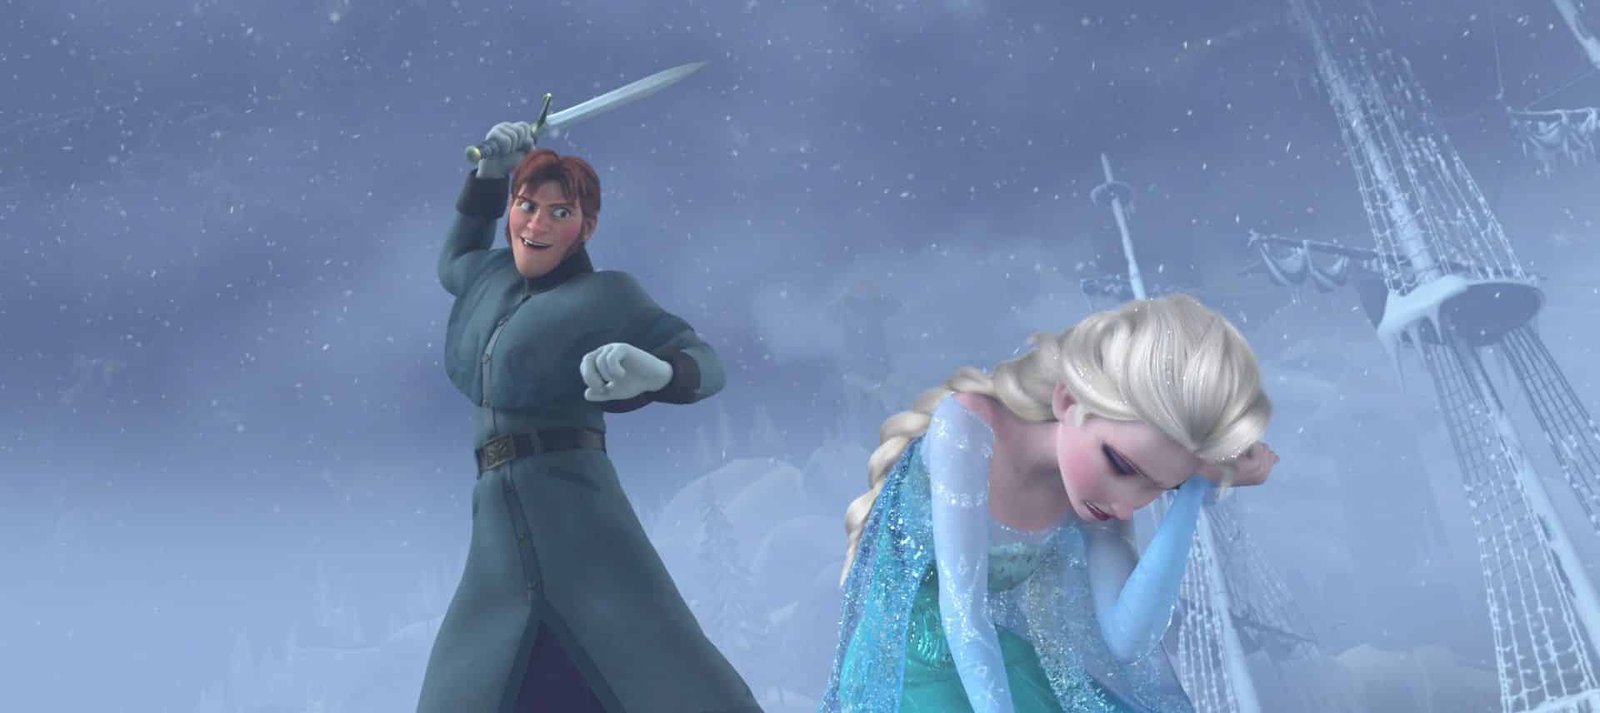 What to Expect from Frozen 3?